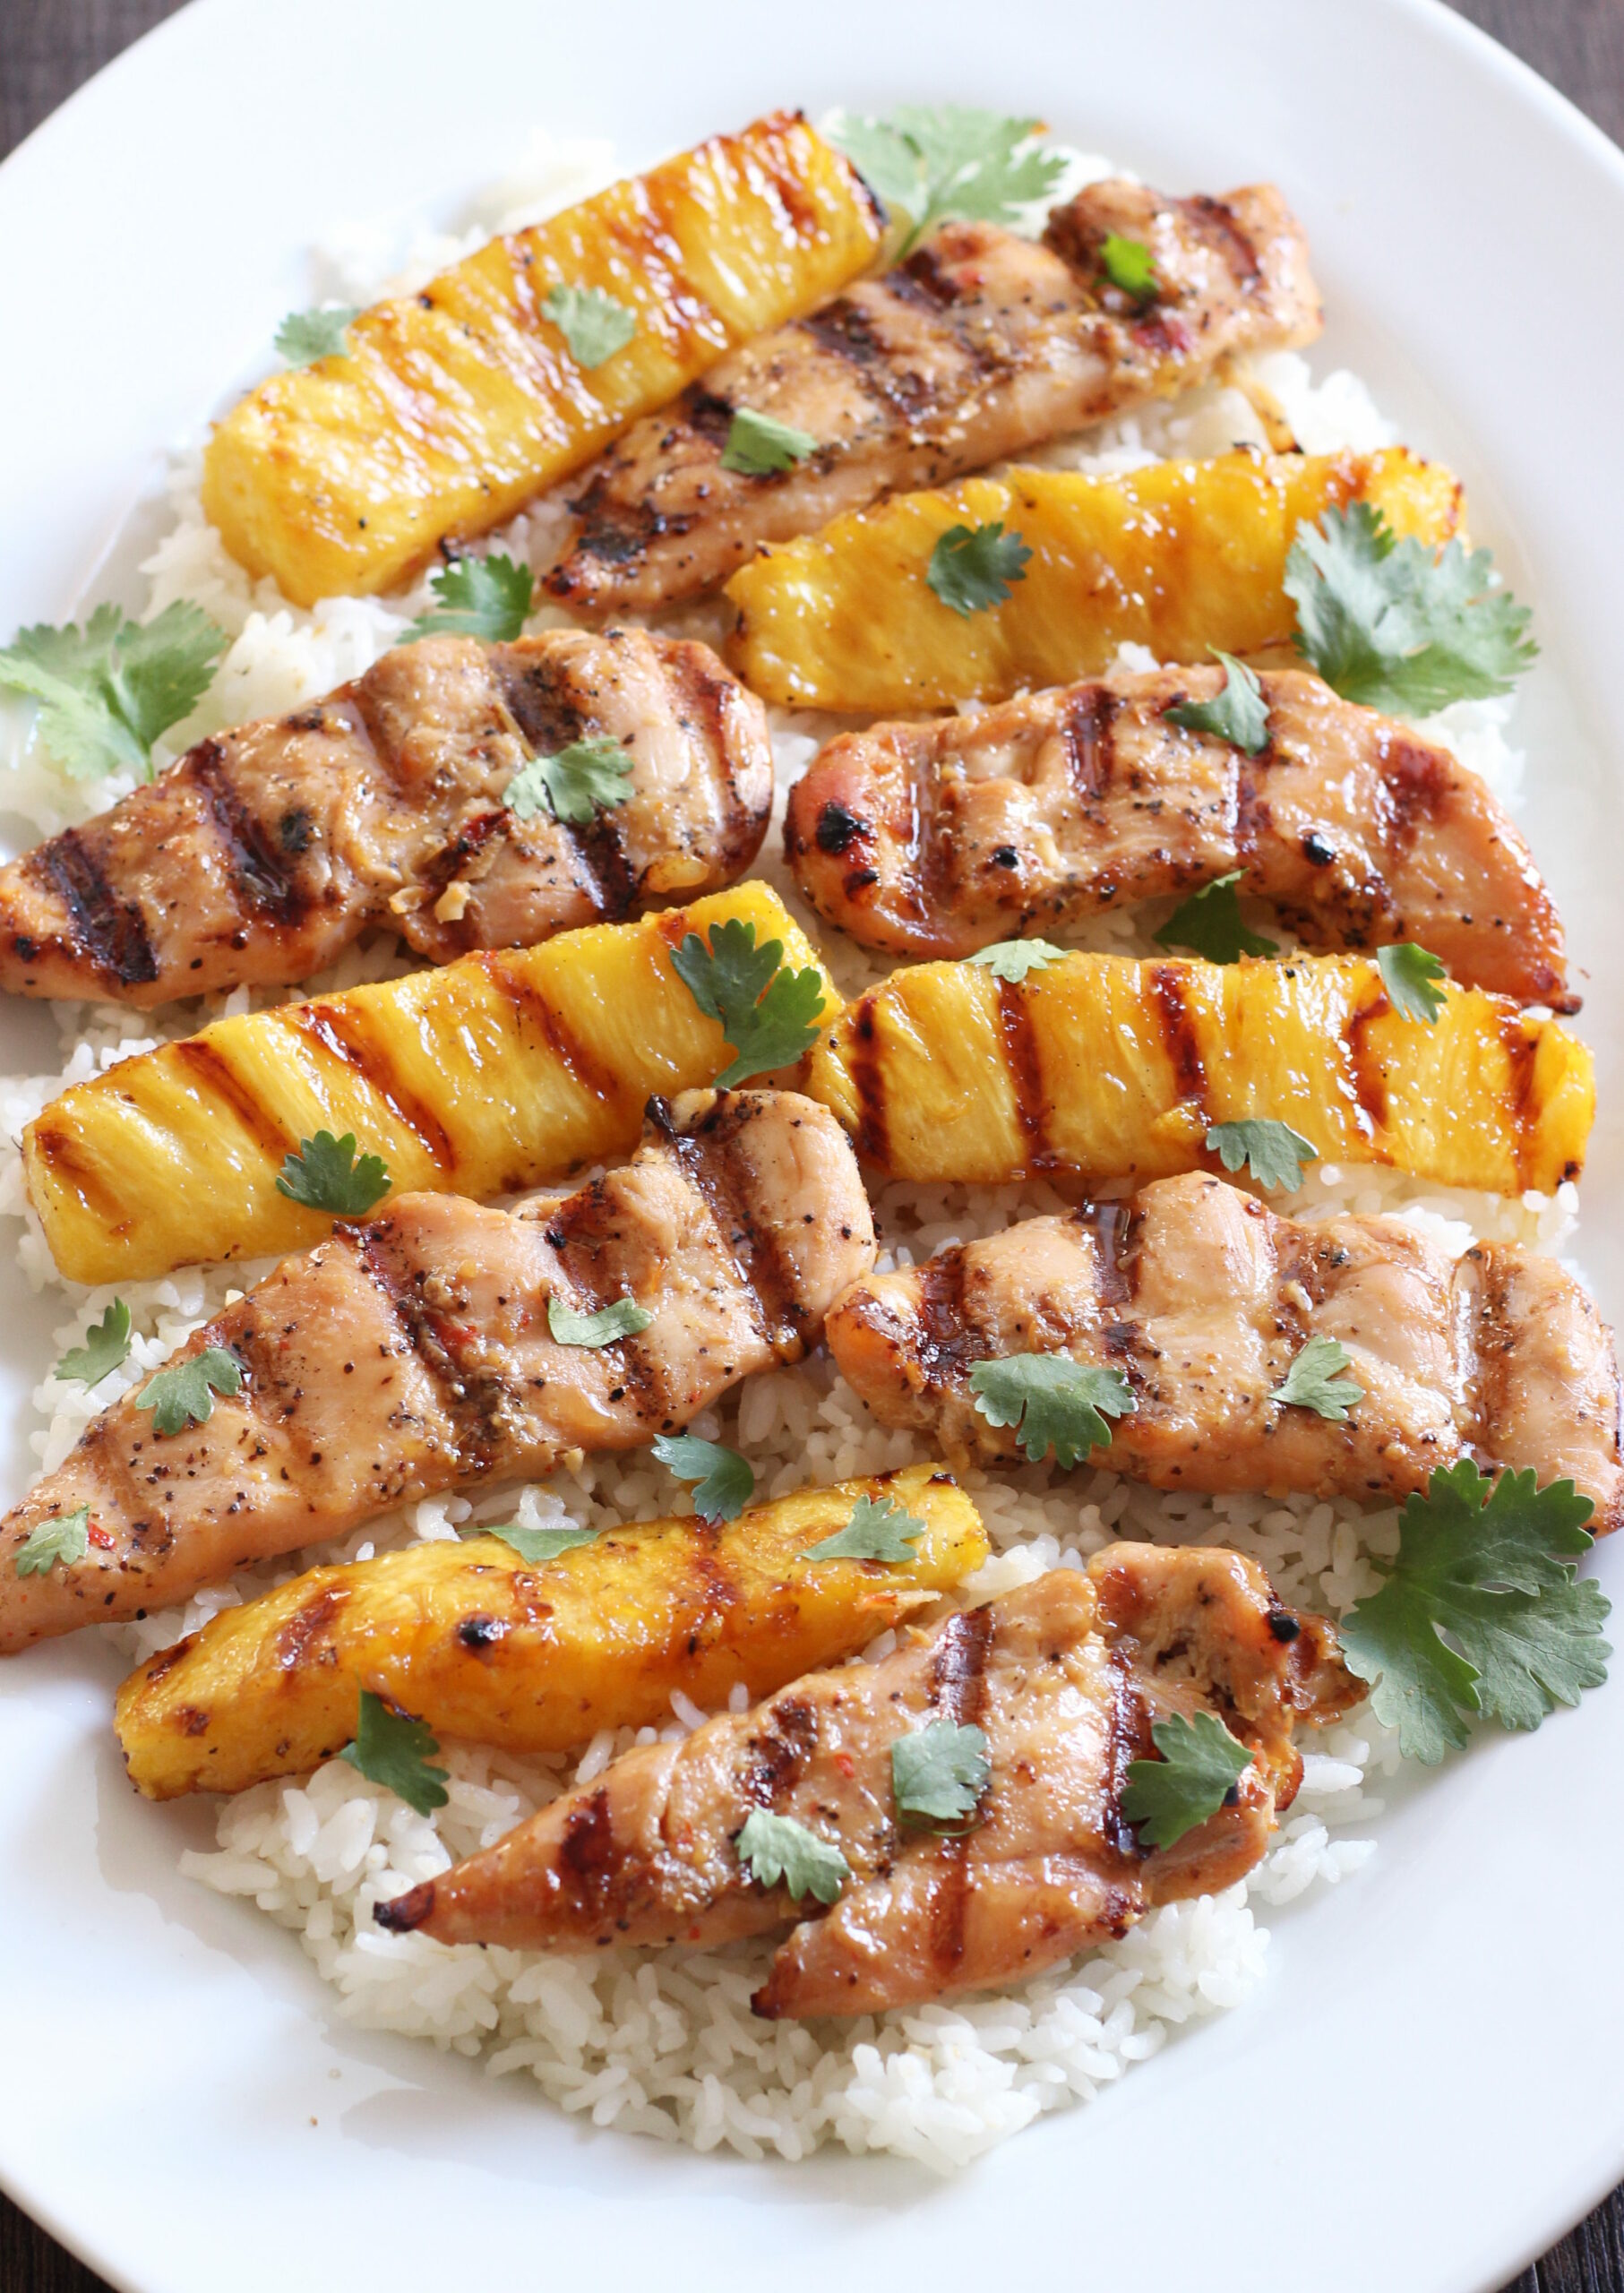 A white platter with a bed of rice. There are strips of grilled chicken breast and strips of grilled pineapple on the rice. The dish is garnished with cilantro leaves.